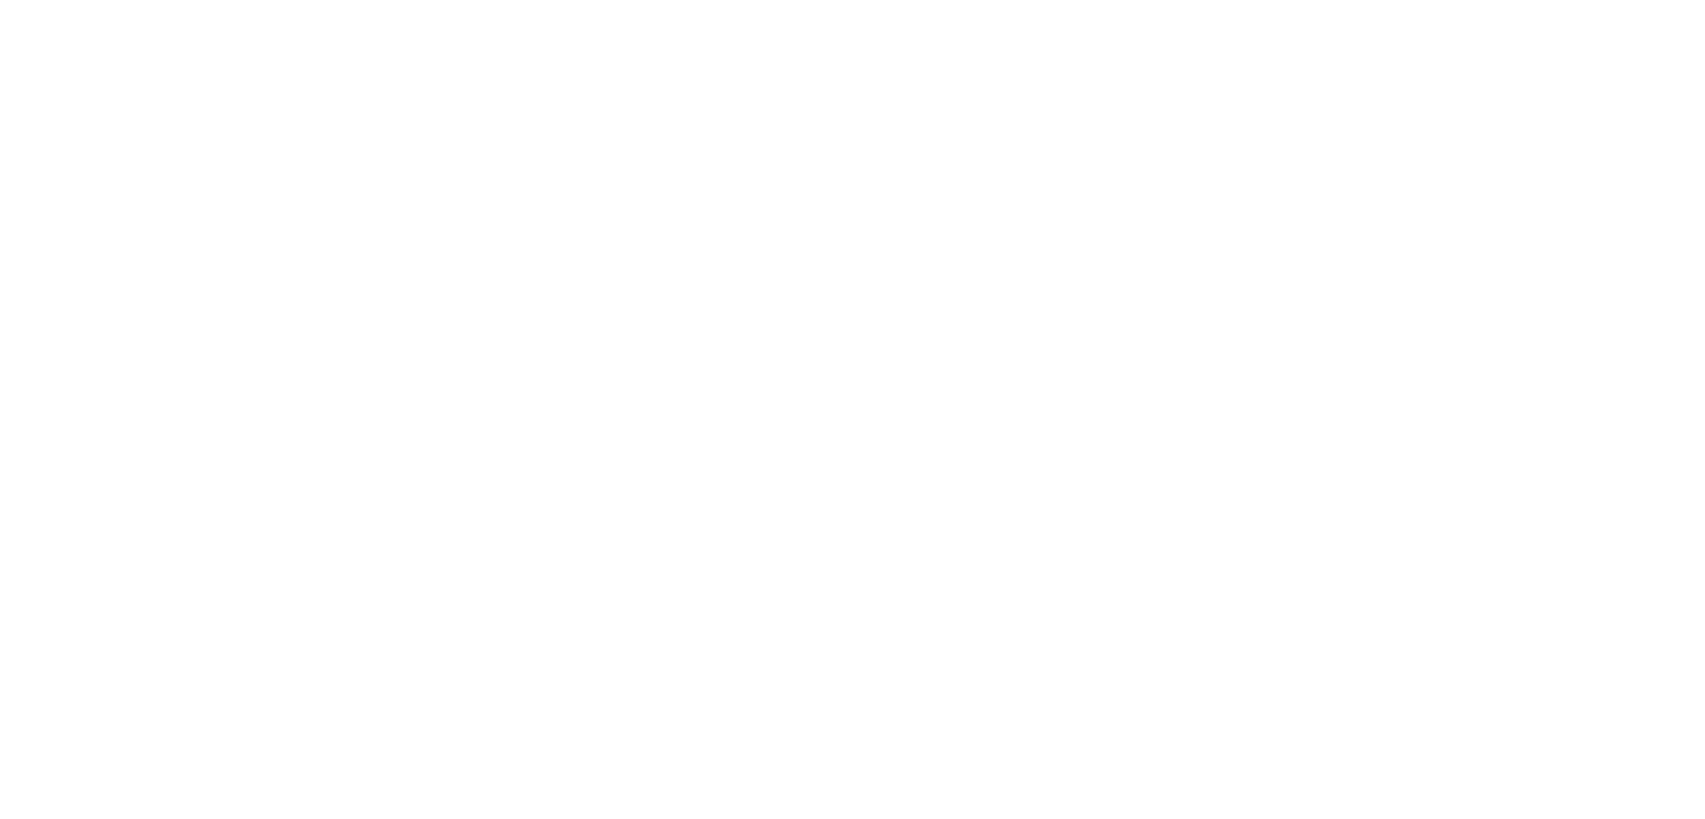 The Mexican Geniuses Exhibition